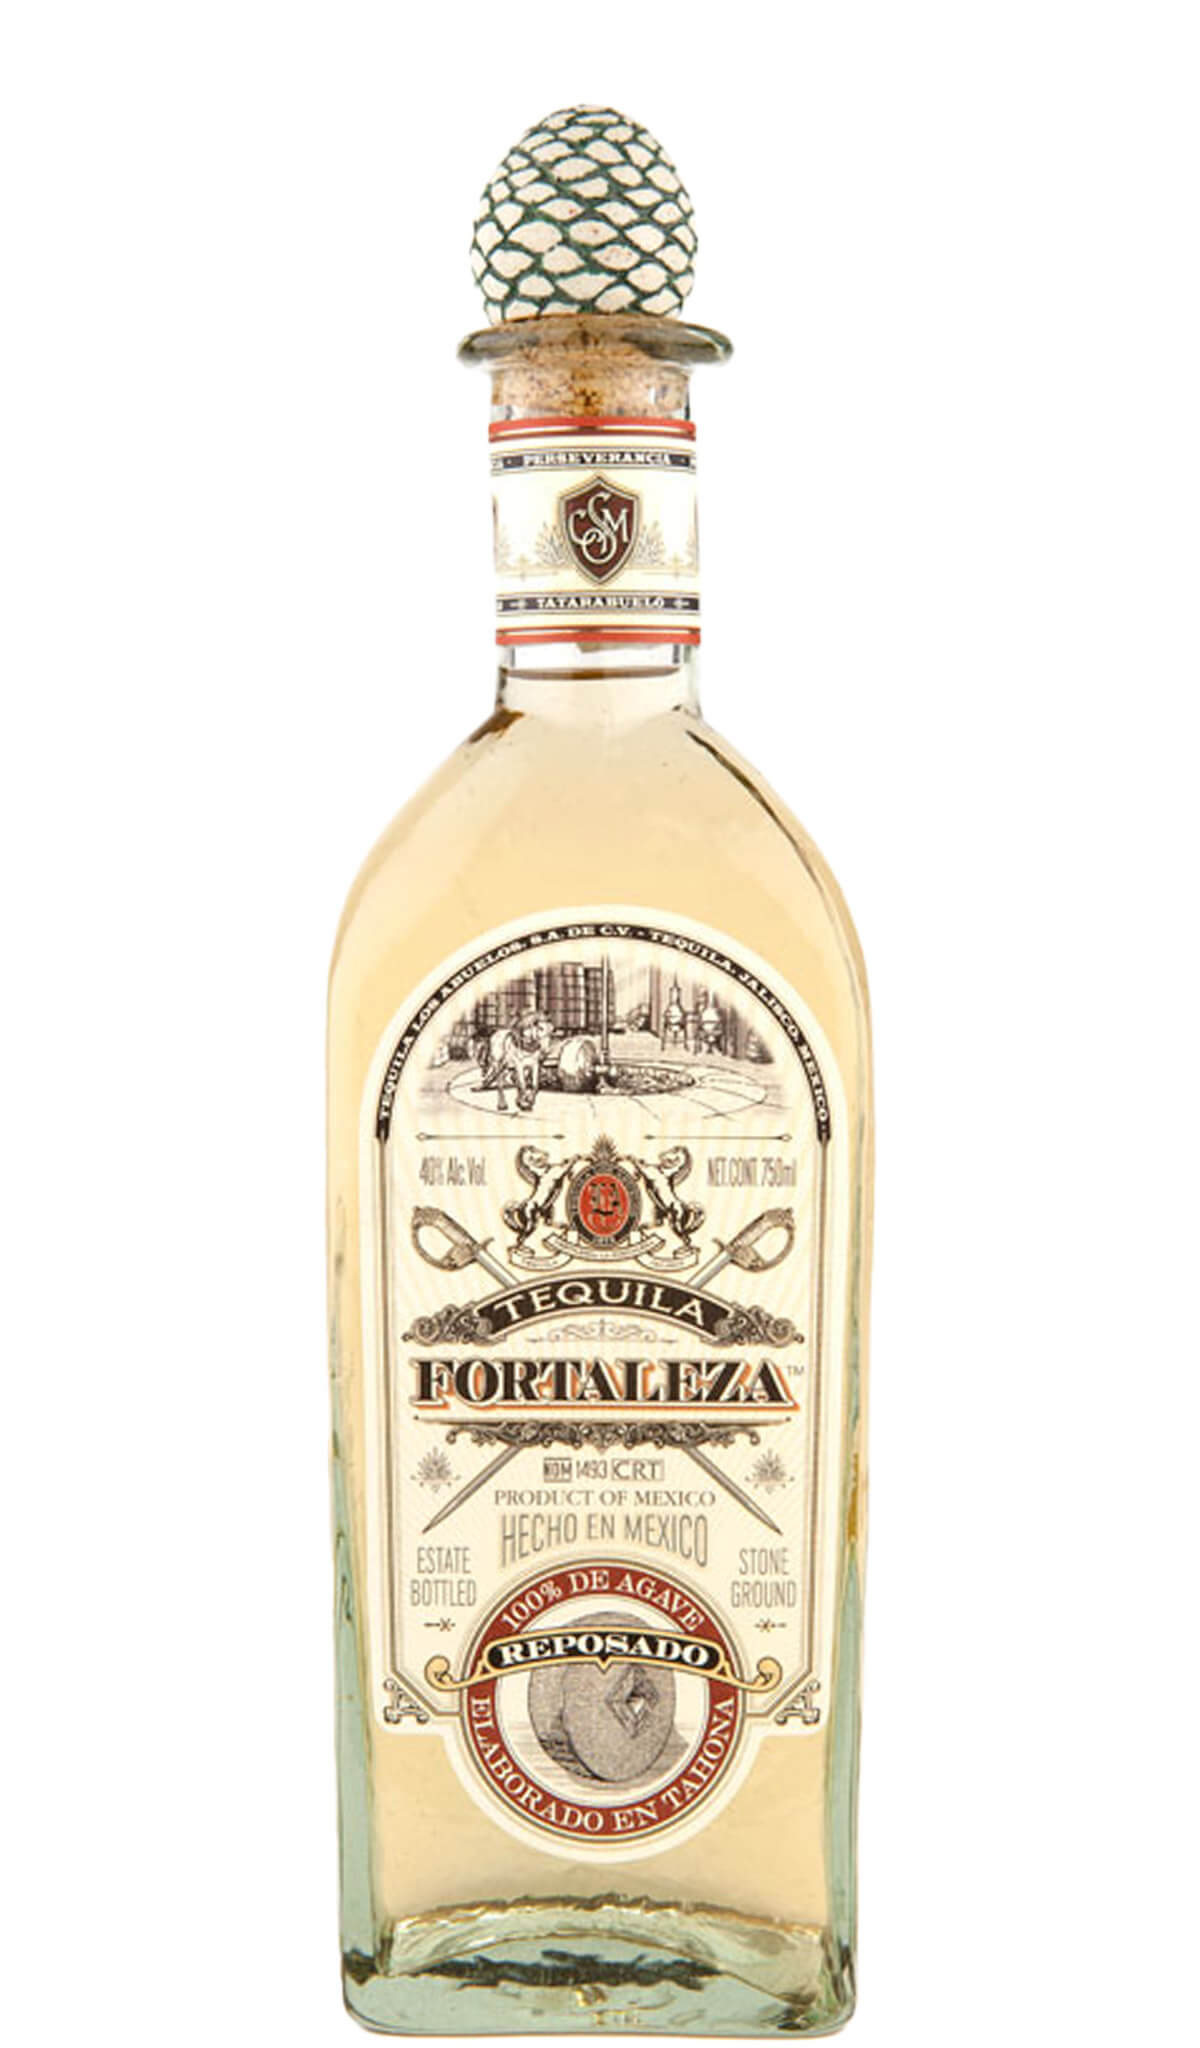 Find out more, explore the range and purchase Fortaleza Reposado Tequila 750ml available online at Wine Sellers Direct - Australia's independent liquor specialists.